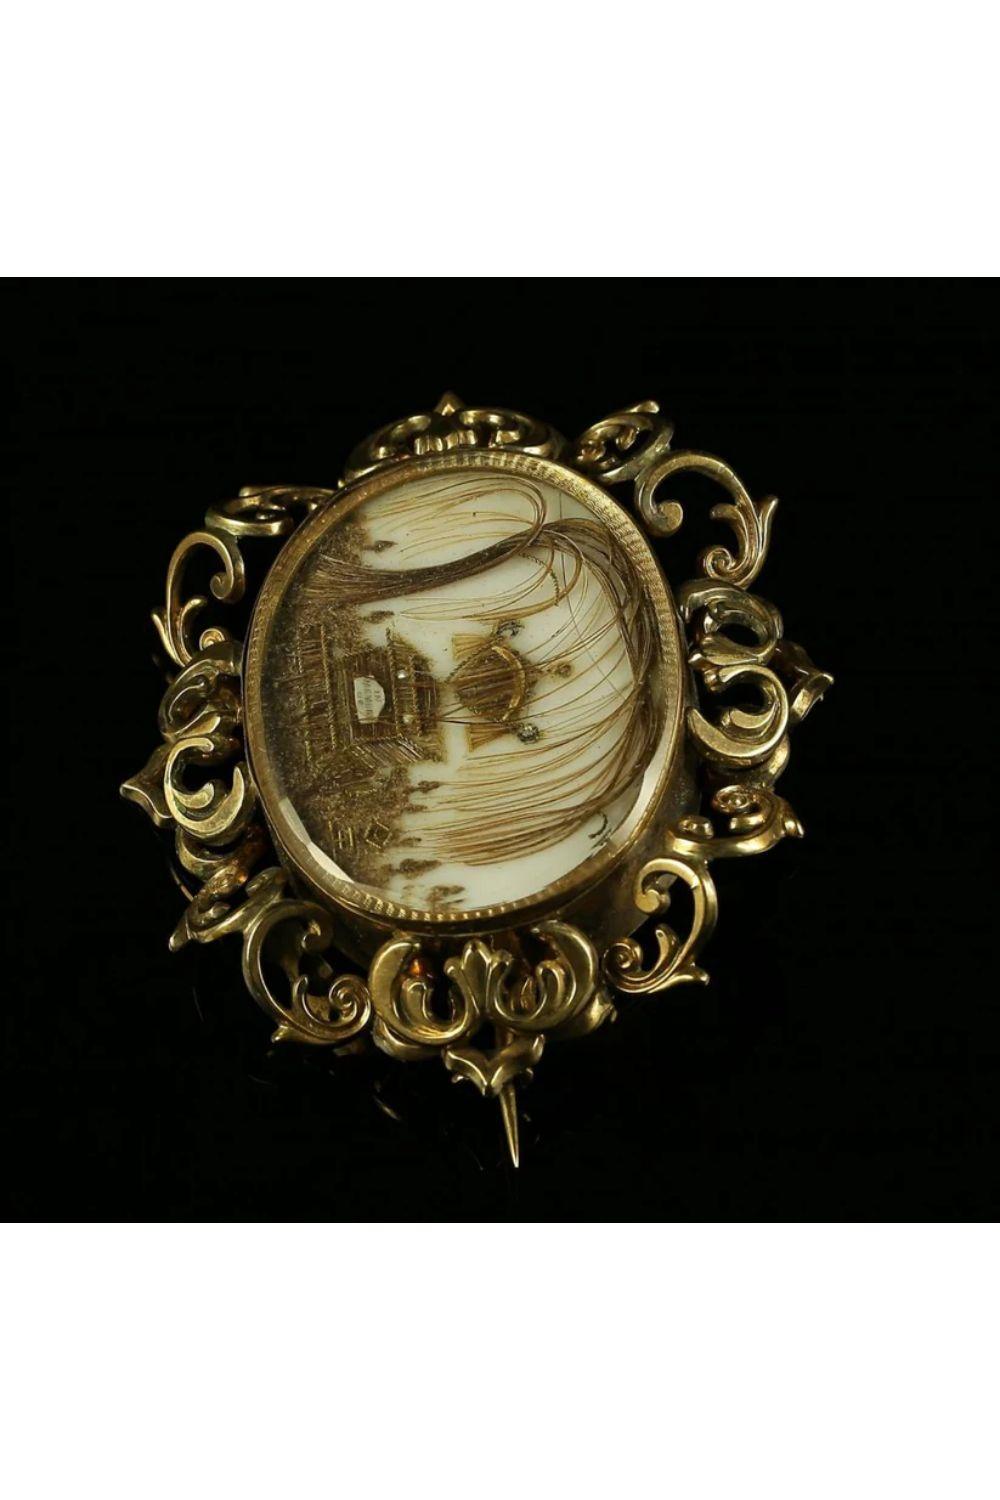 A beautifully preserved antique Georgian Mourning brooch from the late 18th Century featuring a detailed image of an urn and coffin in the centre with the words: “In memory of” written at the front. The image is laid on a mother of pearl base and